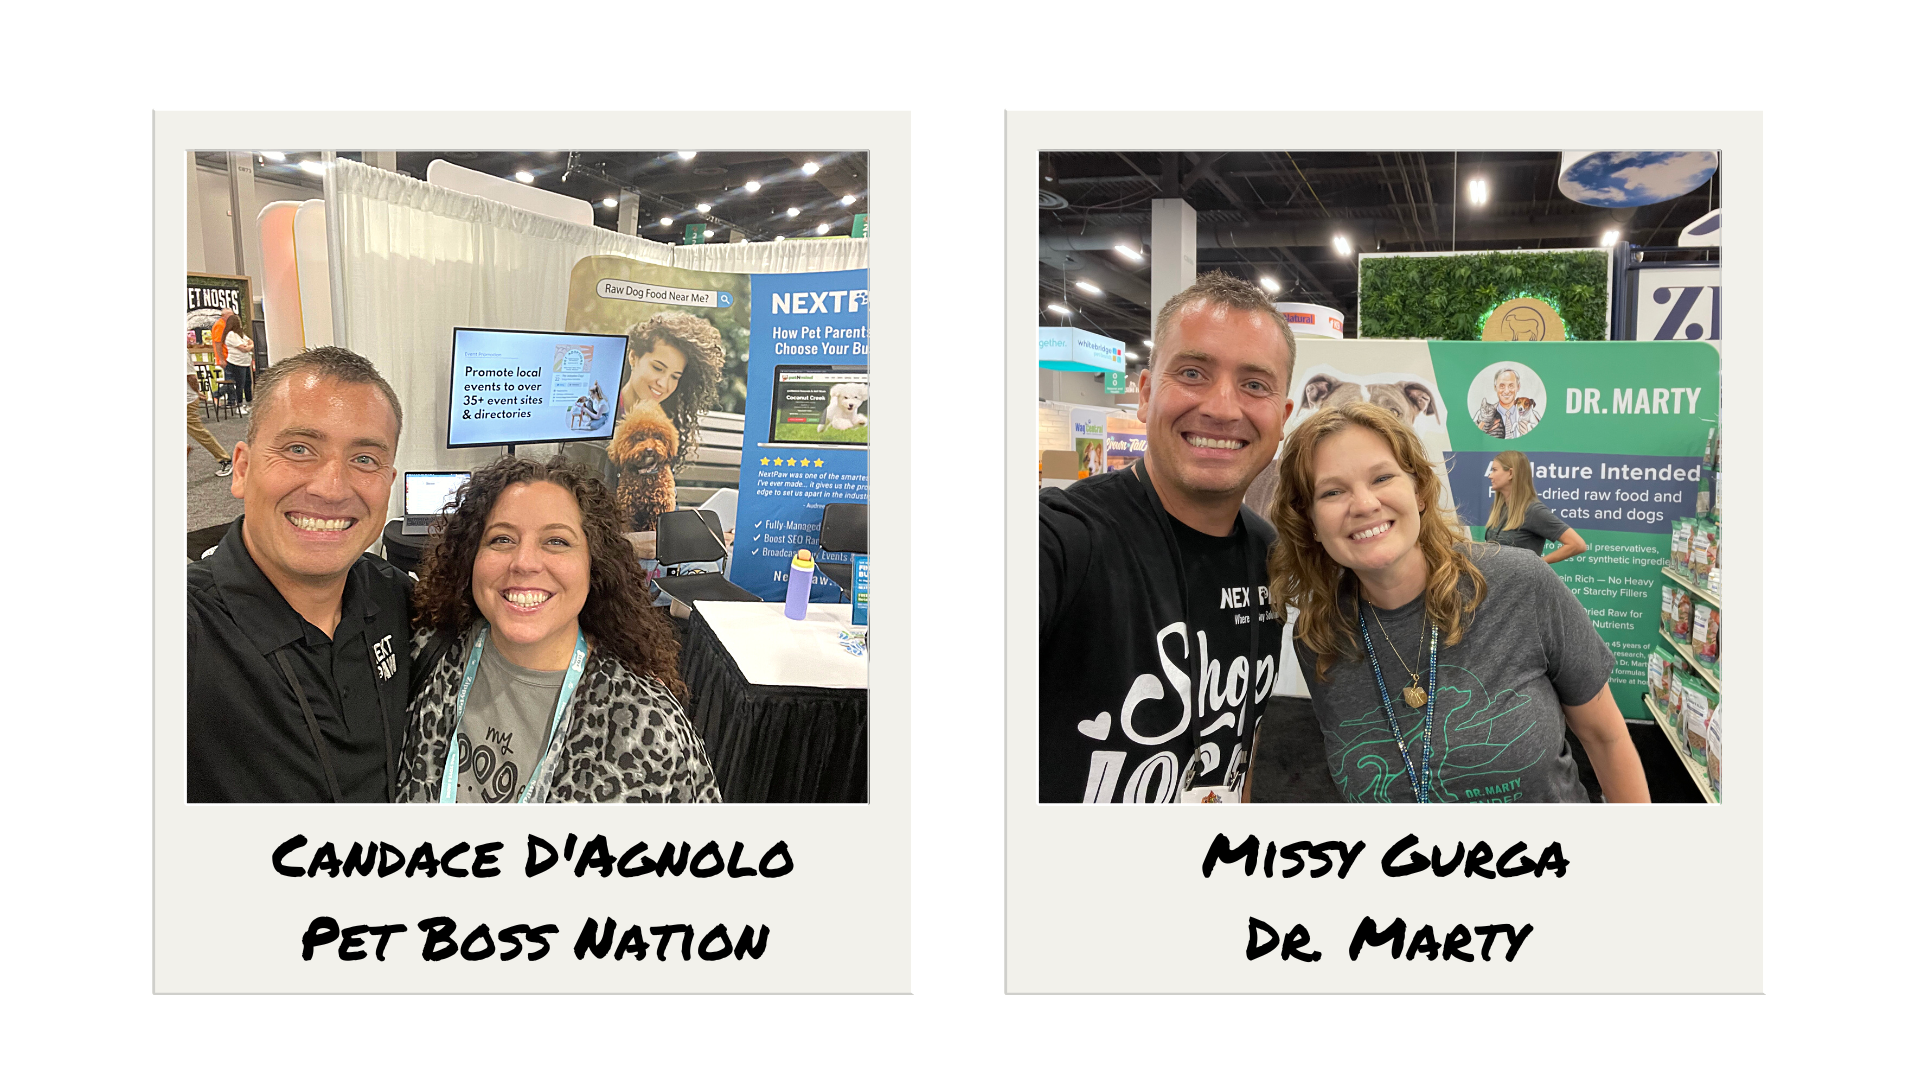 Candace D'Agnolo from Pet Boss Nation and Missy Gurga from Dr. Matry with Brandon Swenson of NextPaw